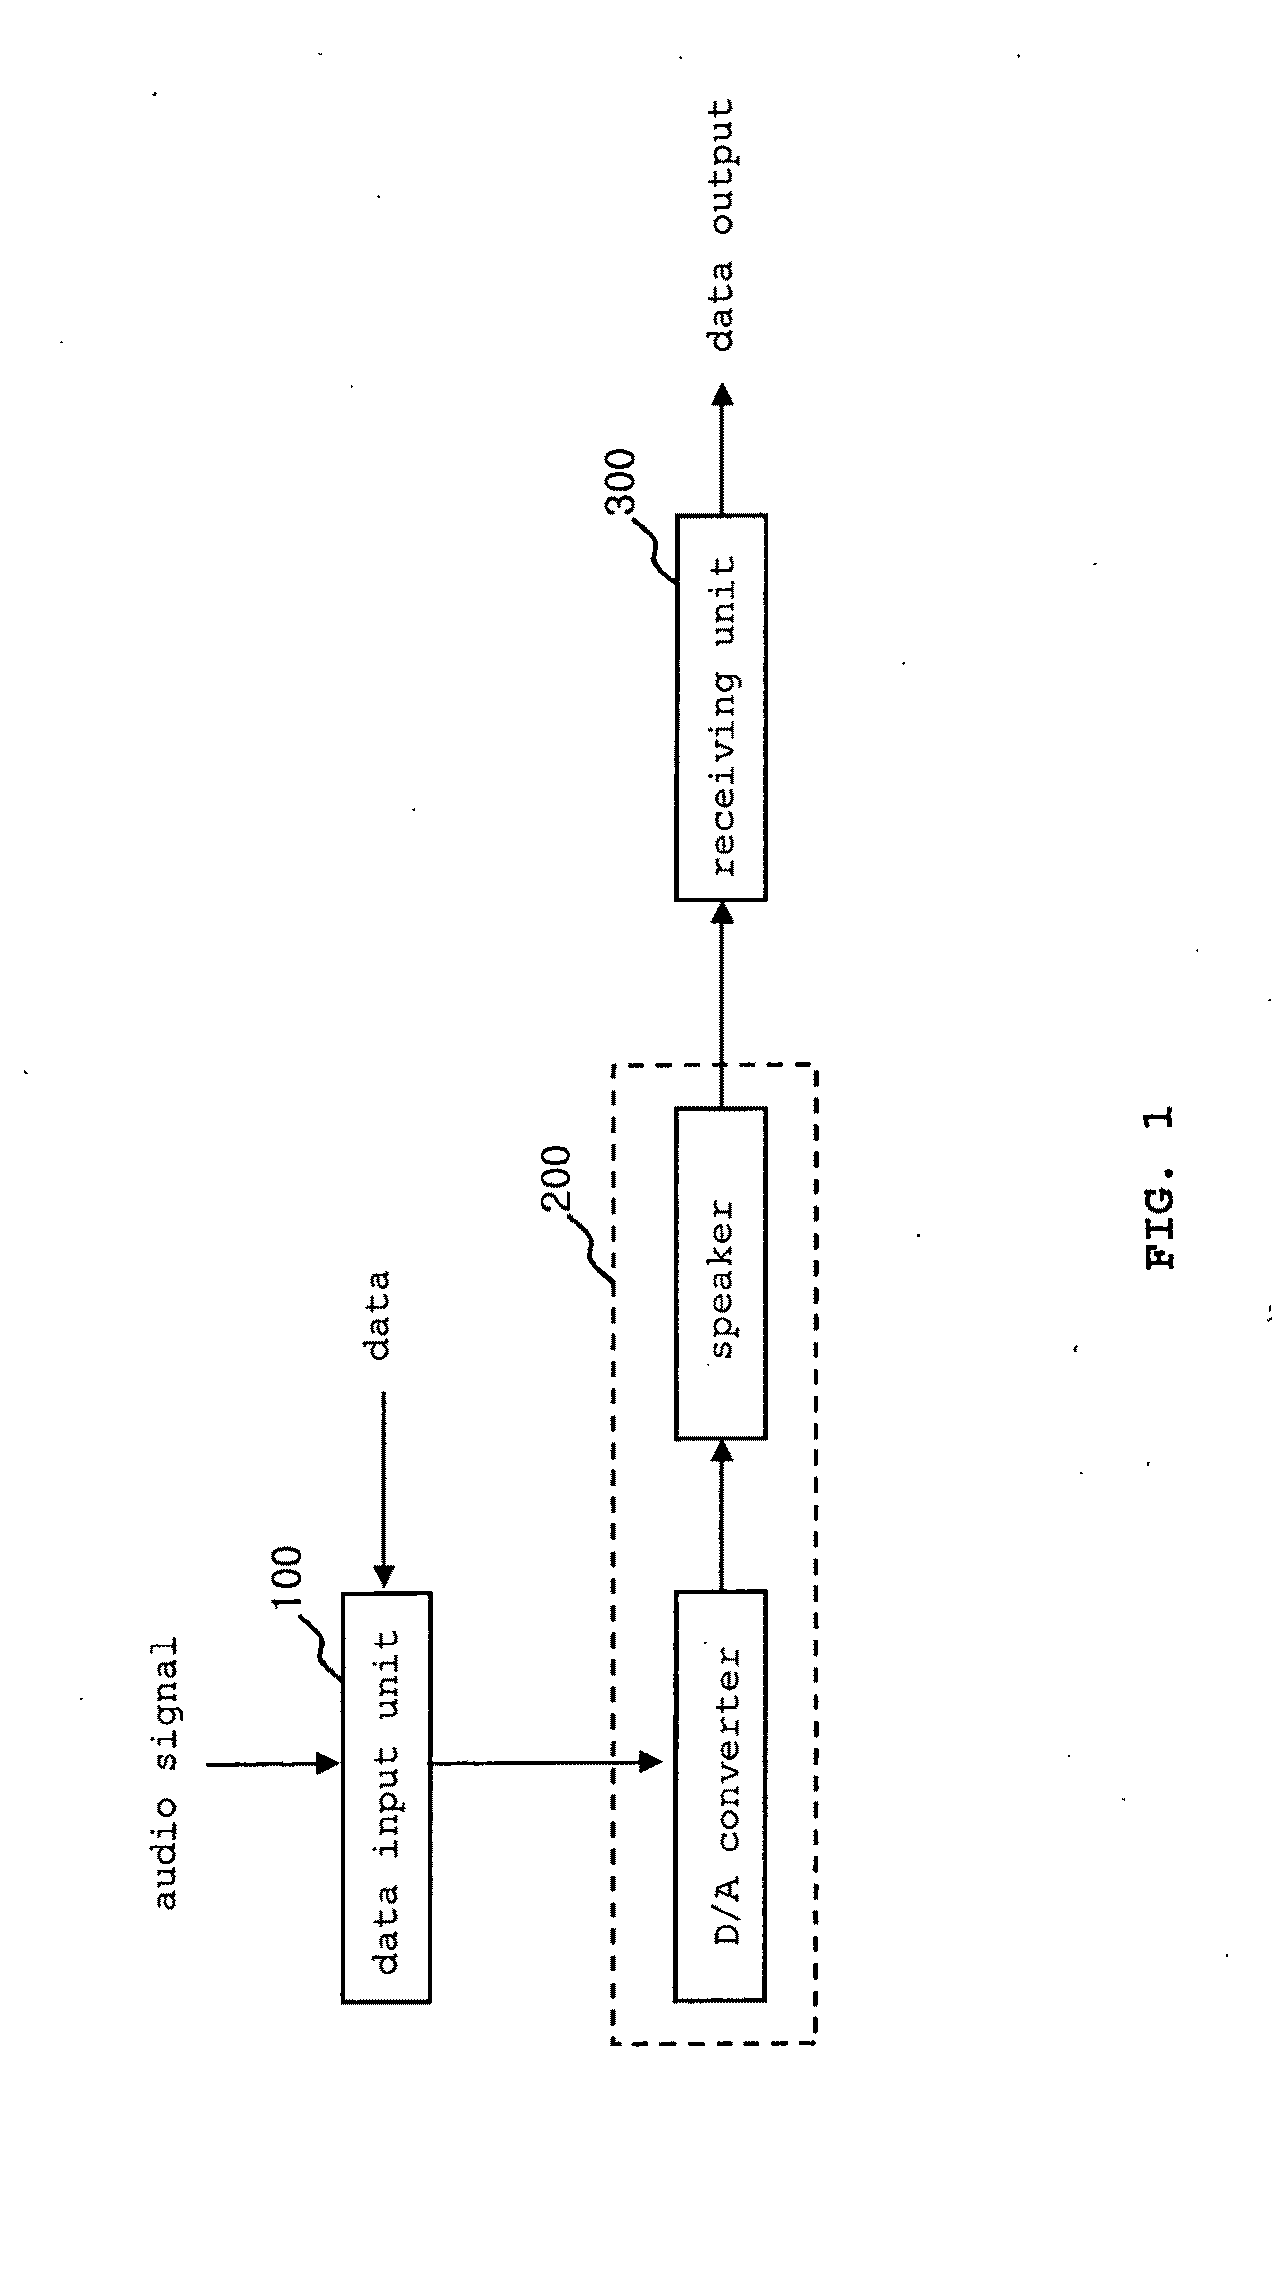 System and method for data reception and transmission in audible frequency band